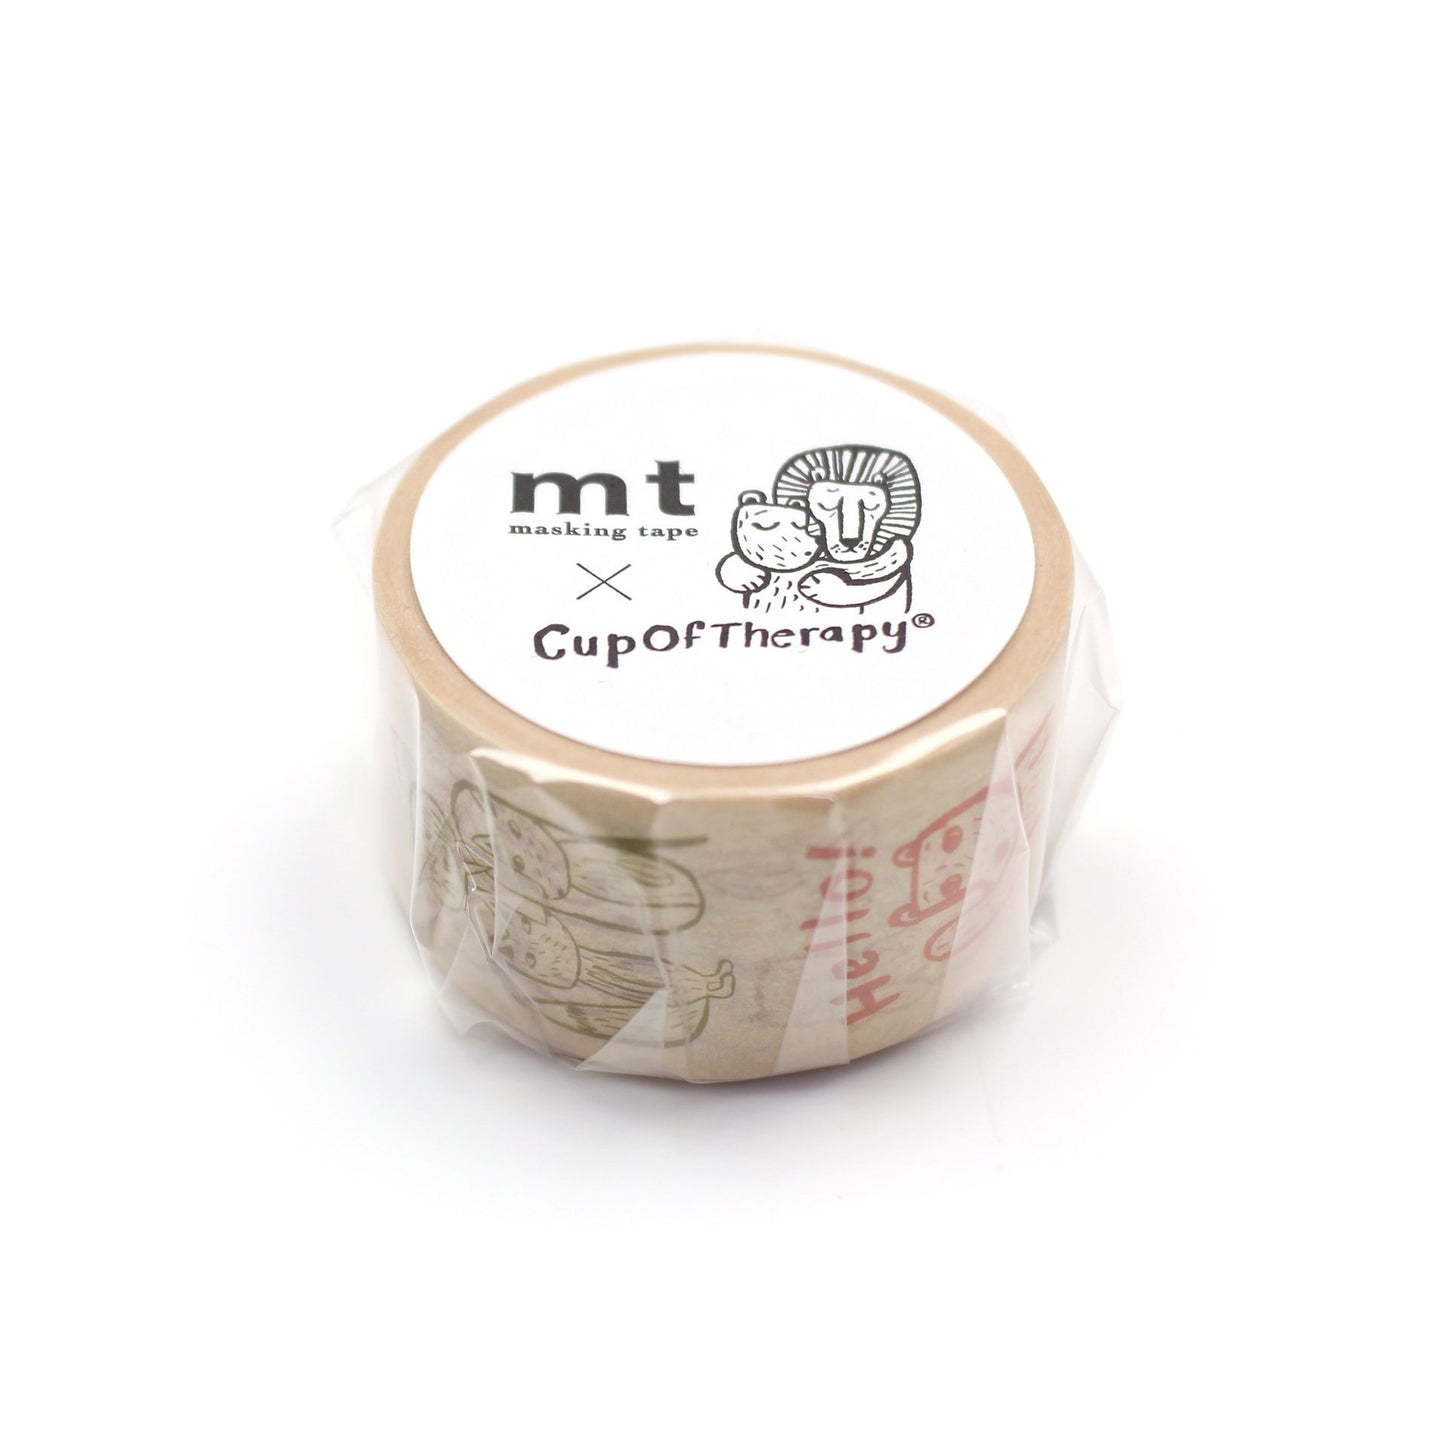 MT masking tape - Cup of Therapy message